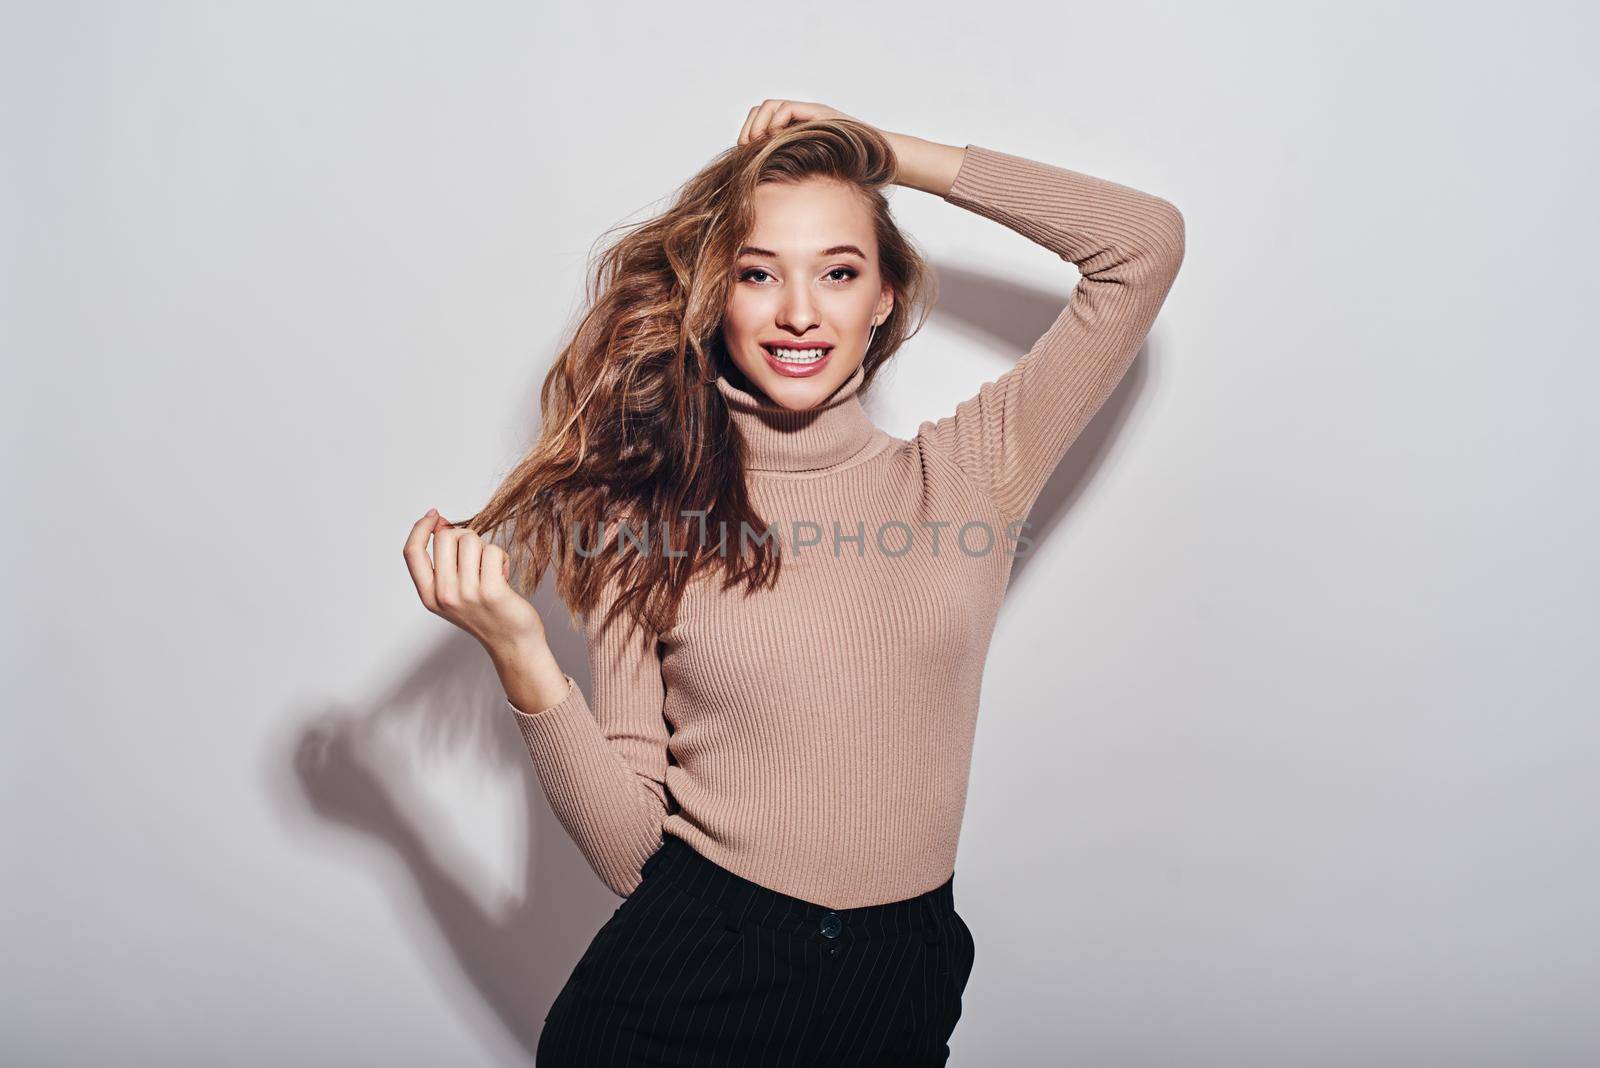 Young businesswoman. Young girl with charming smile posing in studio, touching her hair and looking at camera isolated over white background by friendsstock